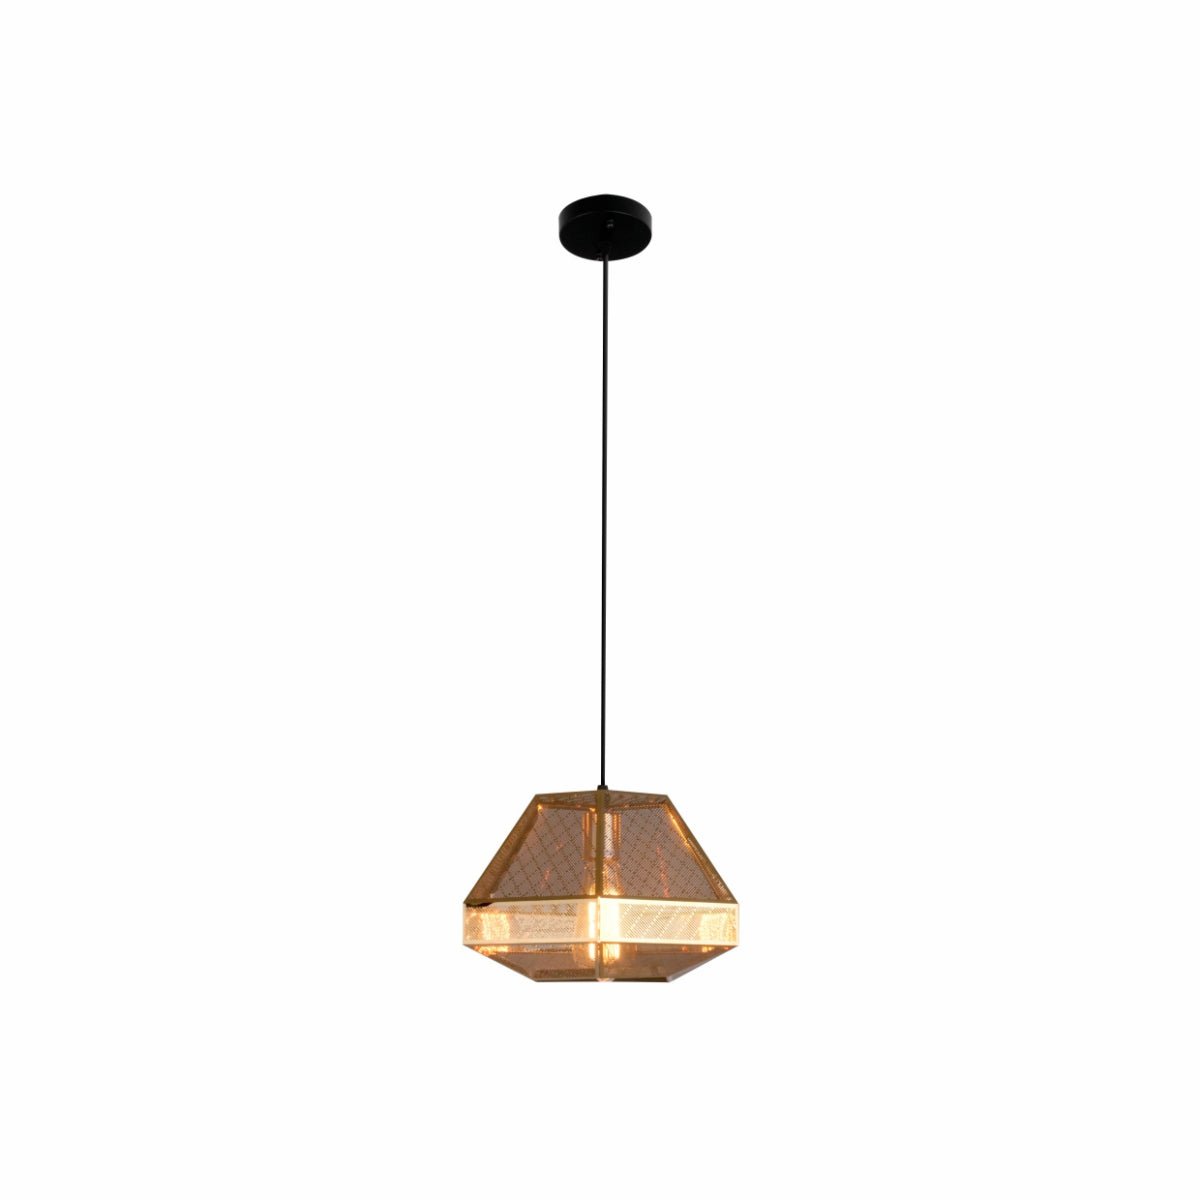 Main image of Golden Metal Polyhedral Pendant Ceiling Light Large with E27 | TEKLED 150-18122